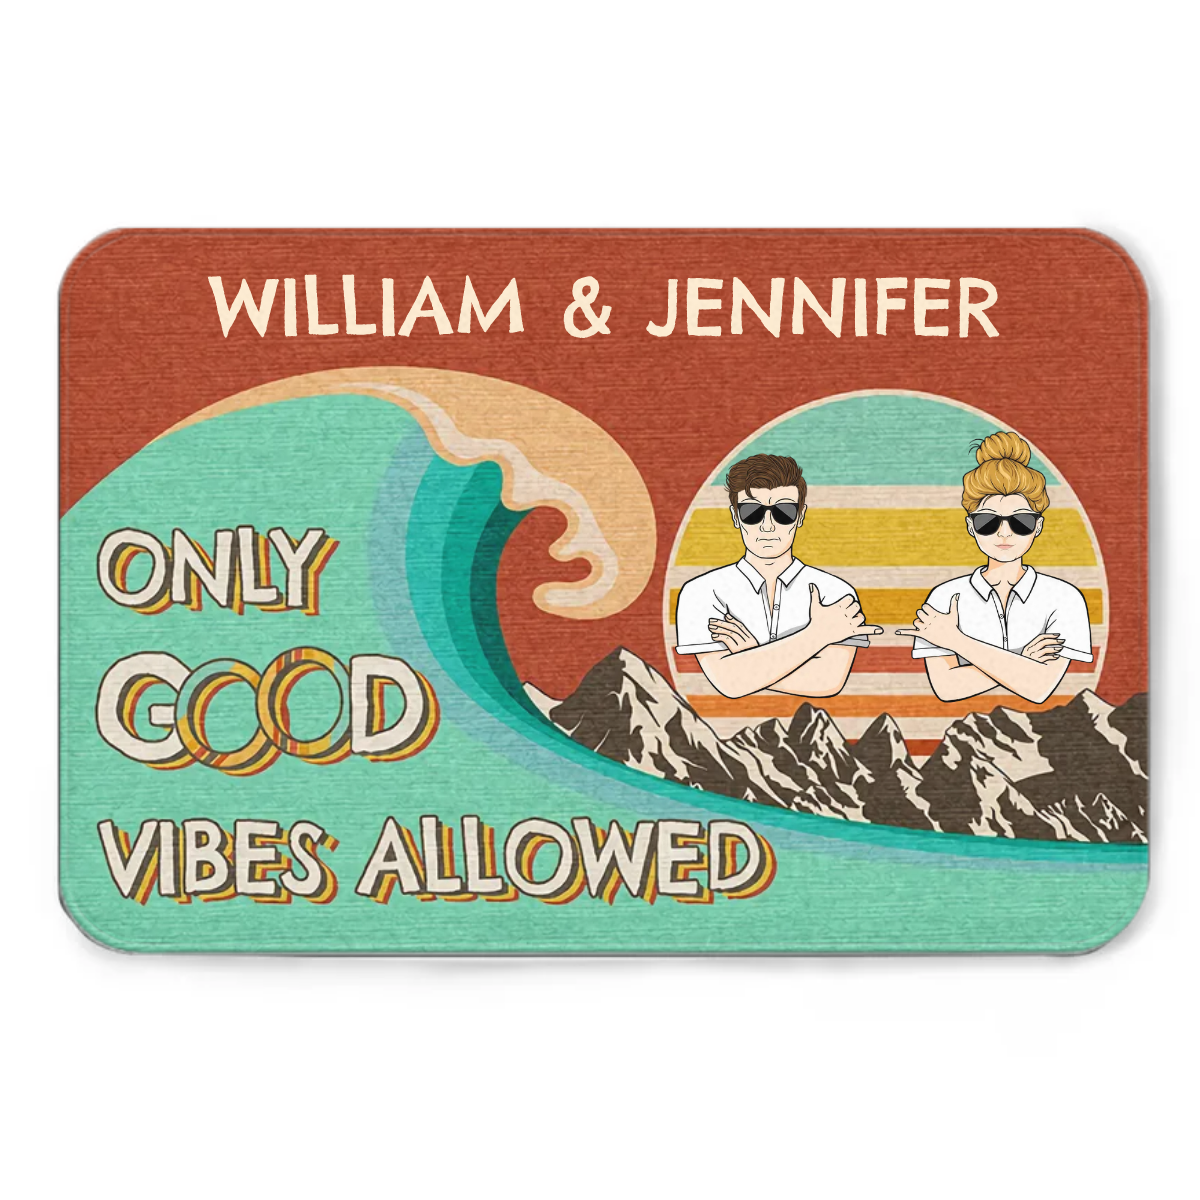 Only Good Vibes Allowed - Gift For Couples - Personalized Custom Doormat